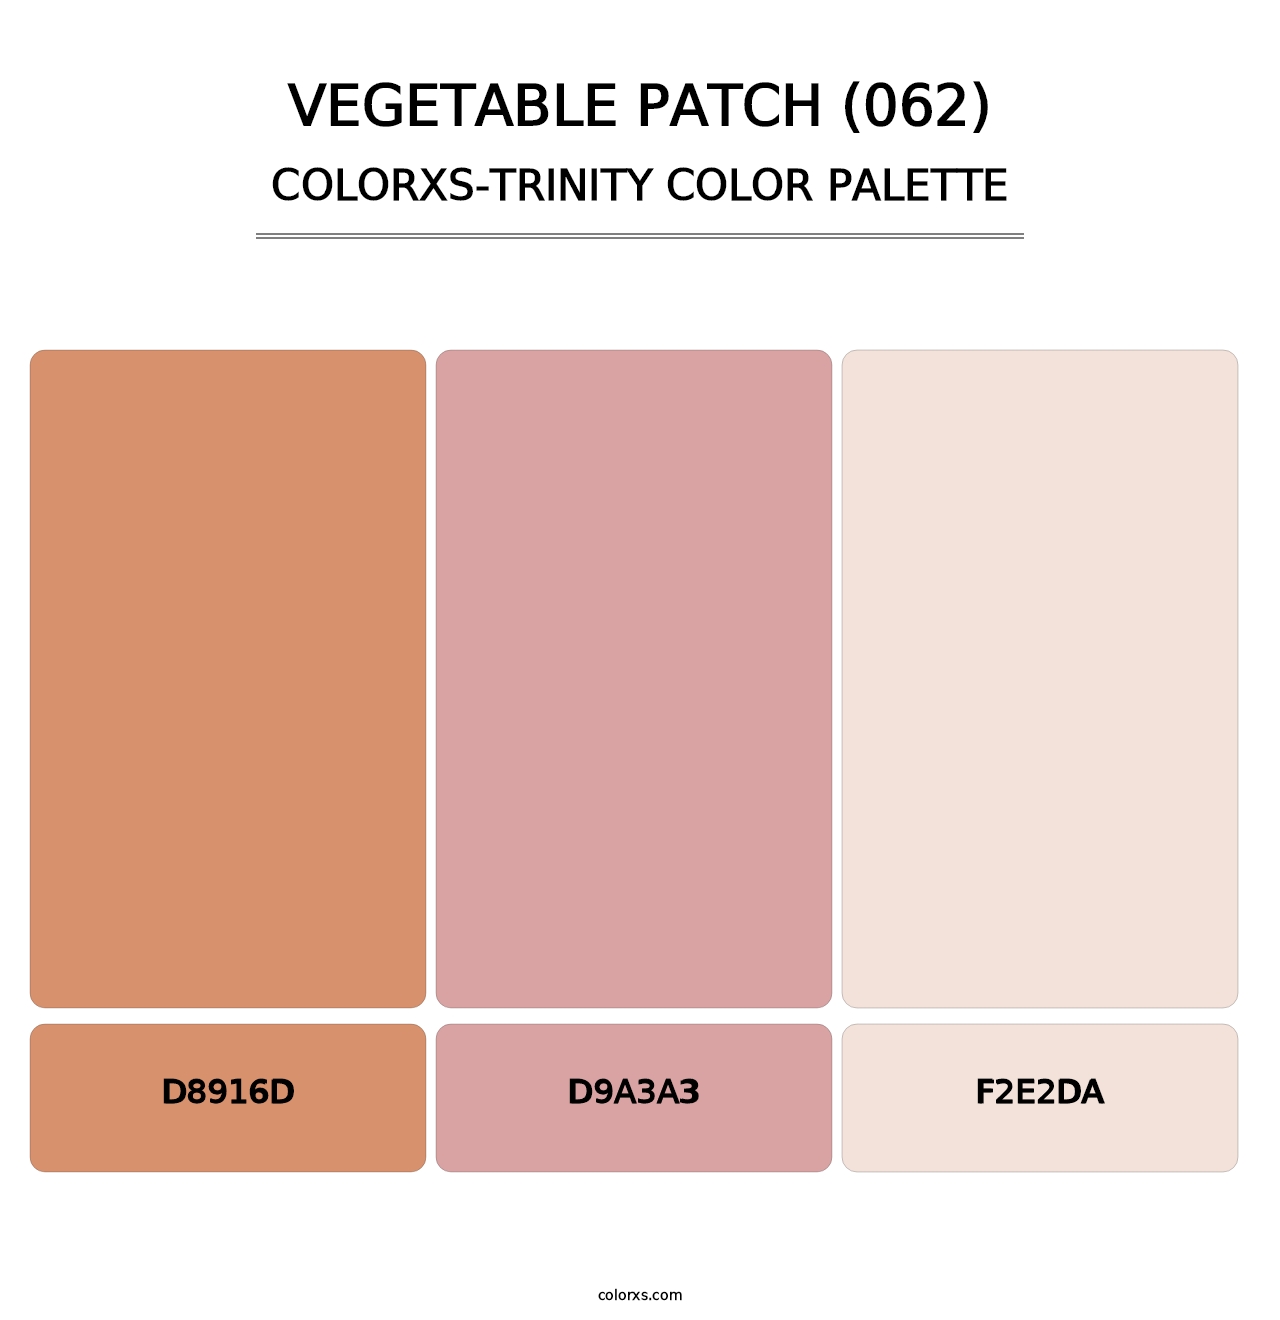 Vegetable Patch (062) - Colorxs Trinity Palette